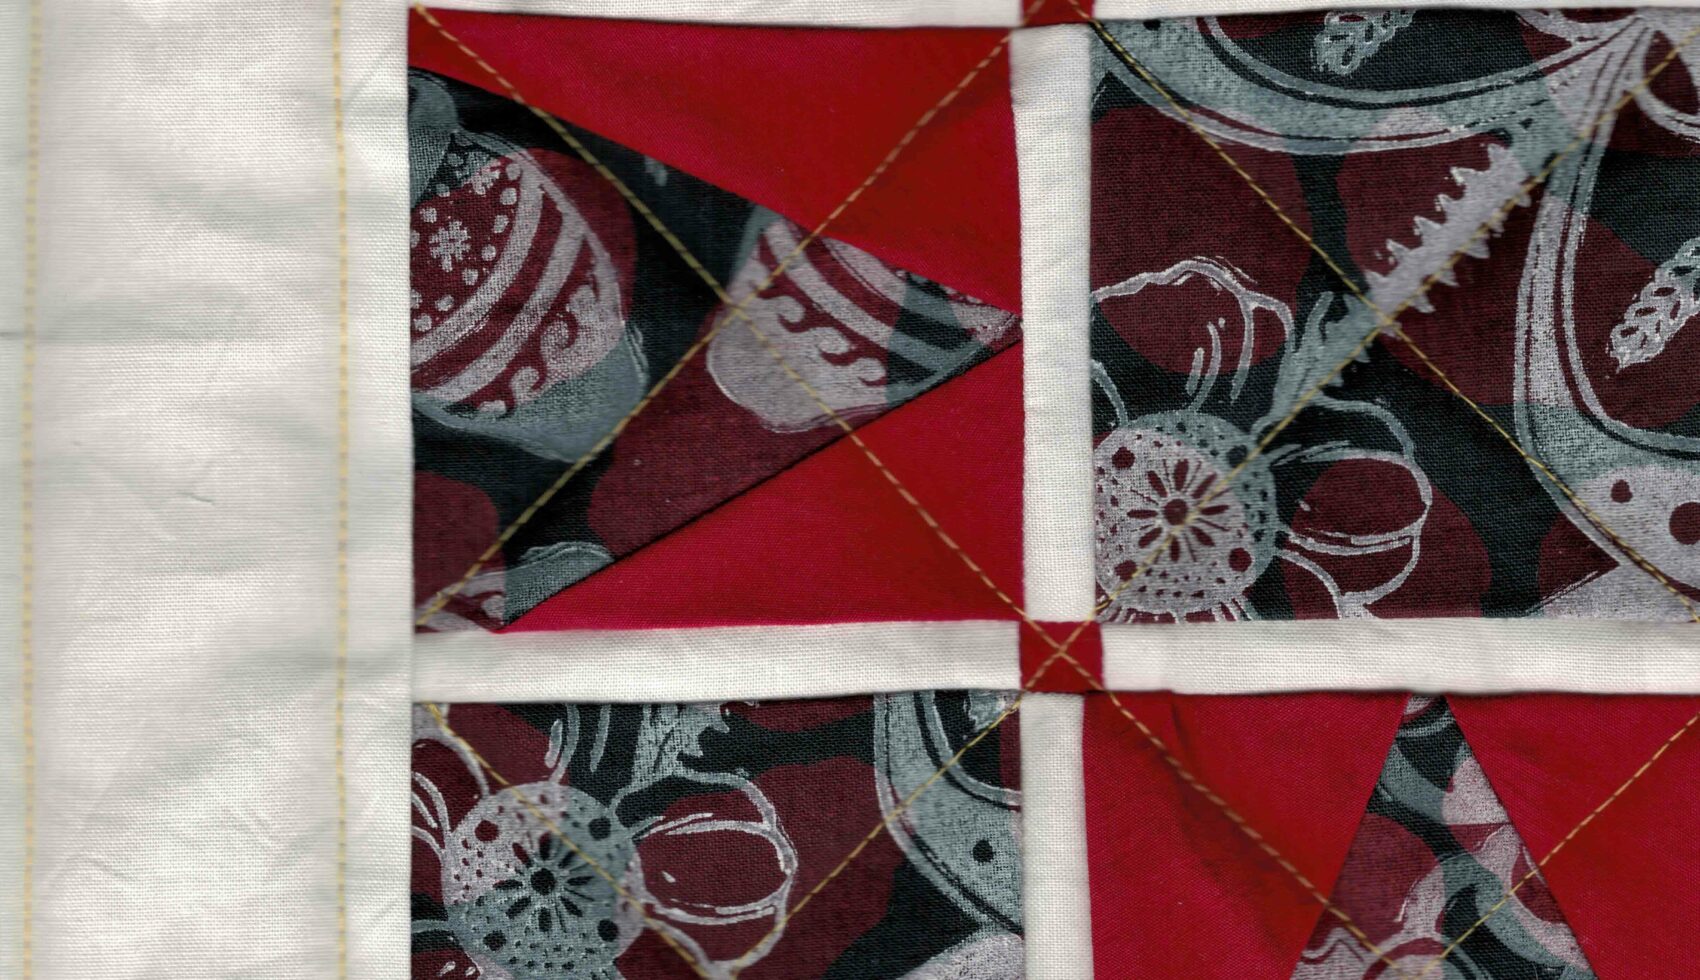 Cropped view of a quilt with squares of printed fabric and red triangles forming a square star. The squares feature a deep red bAckground and dark blue floral patterns reminiscent of Ukrainian traditional art.